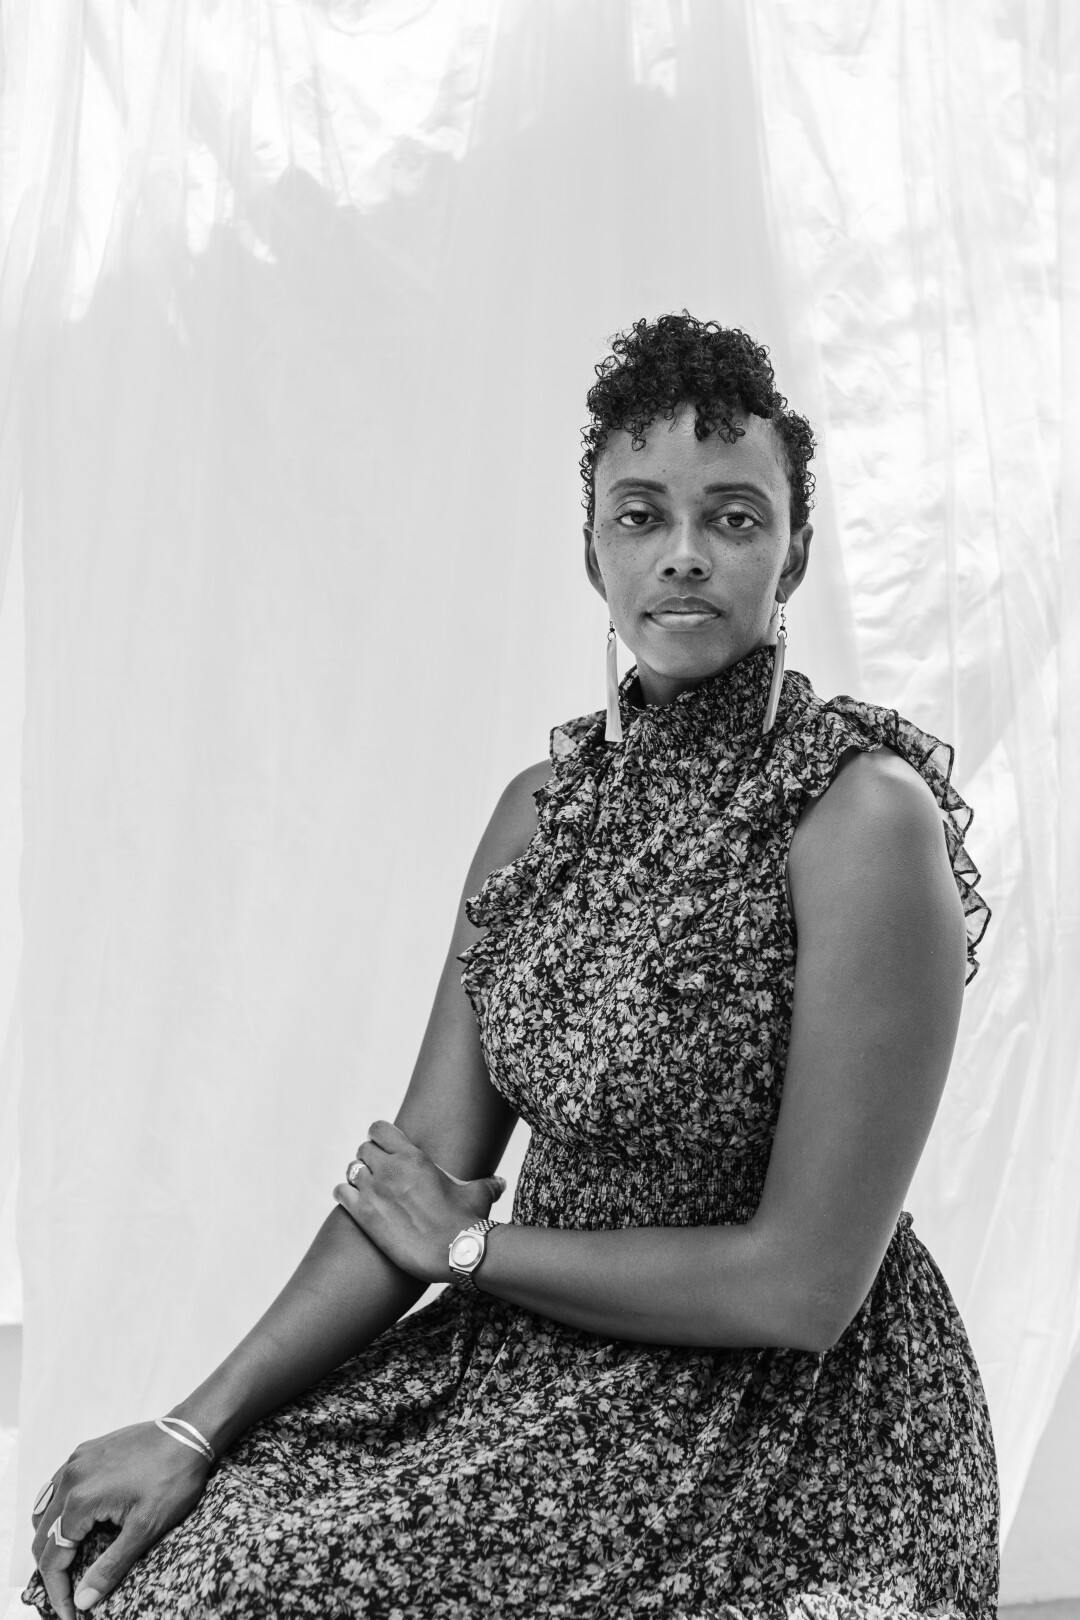 A black and white portrait of writer Angela Flournoy wearing a floral dress sitting in front of a fabric backdrop